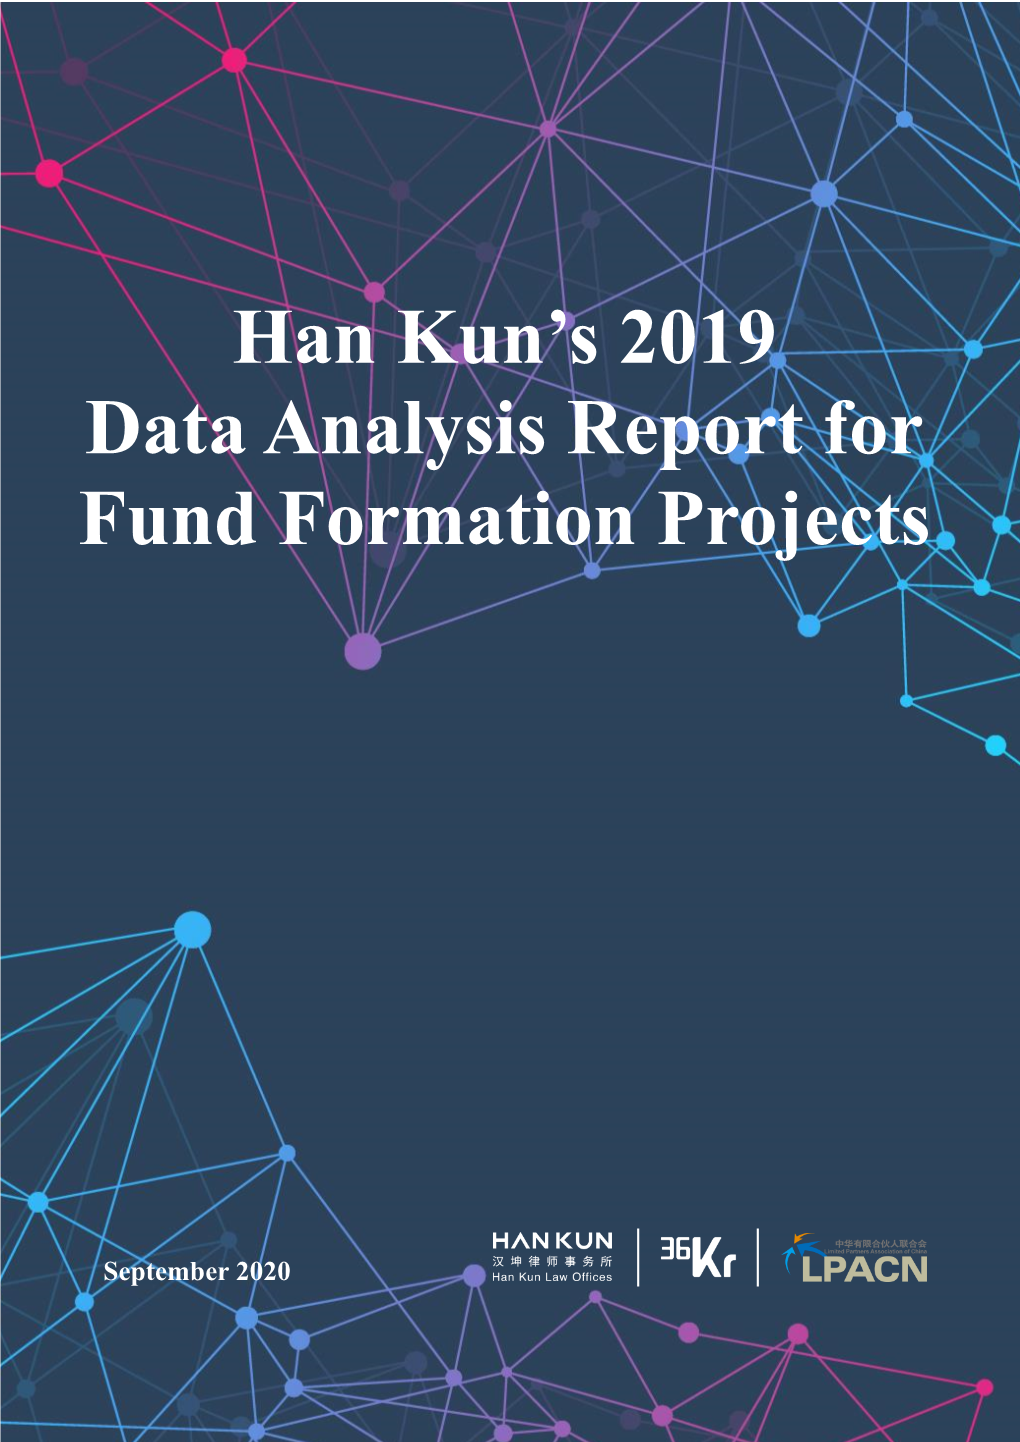 Han Kun 2019 Data Analysis Report for Fund Formation Projects